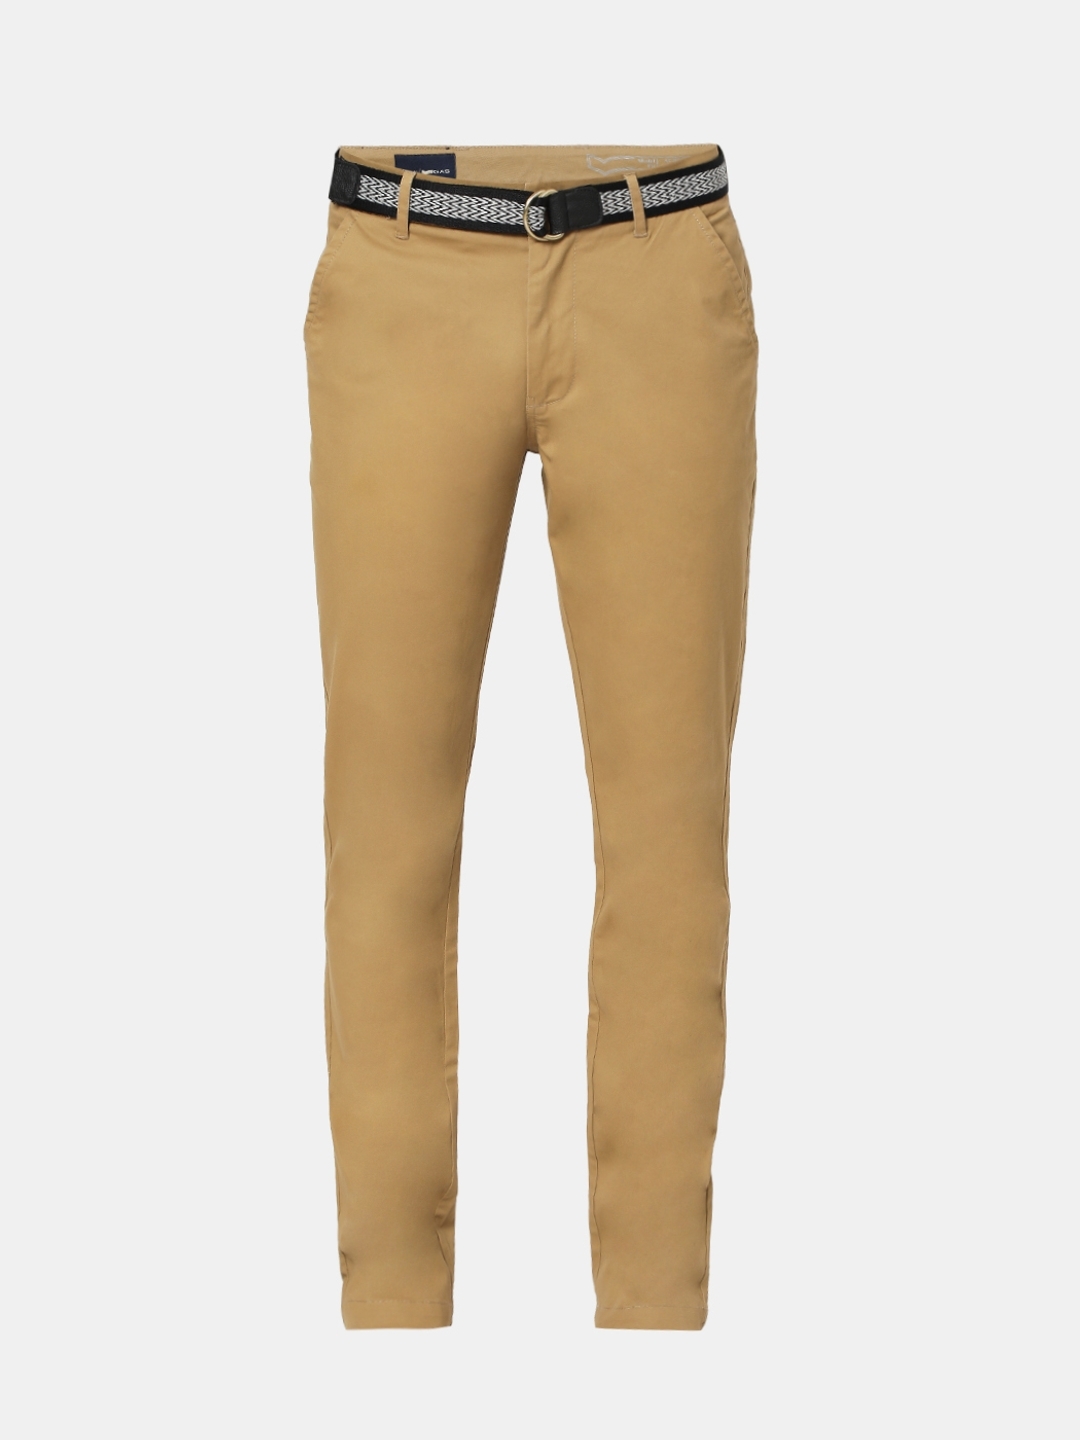 Buy Jugend Men Beige Solid Slim fit Wrinkle free Chinos Online at Low  Prices in India - Paytmmall.com